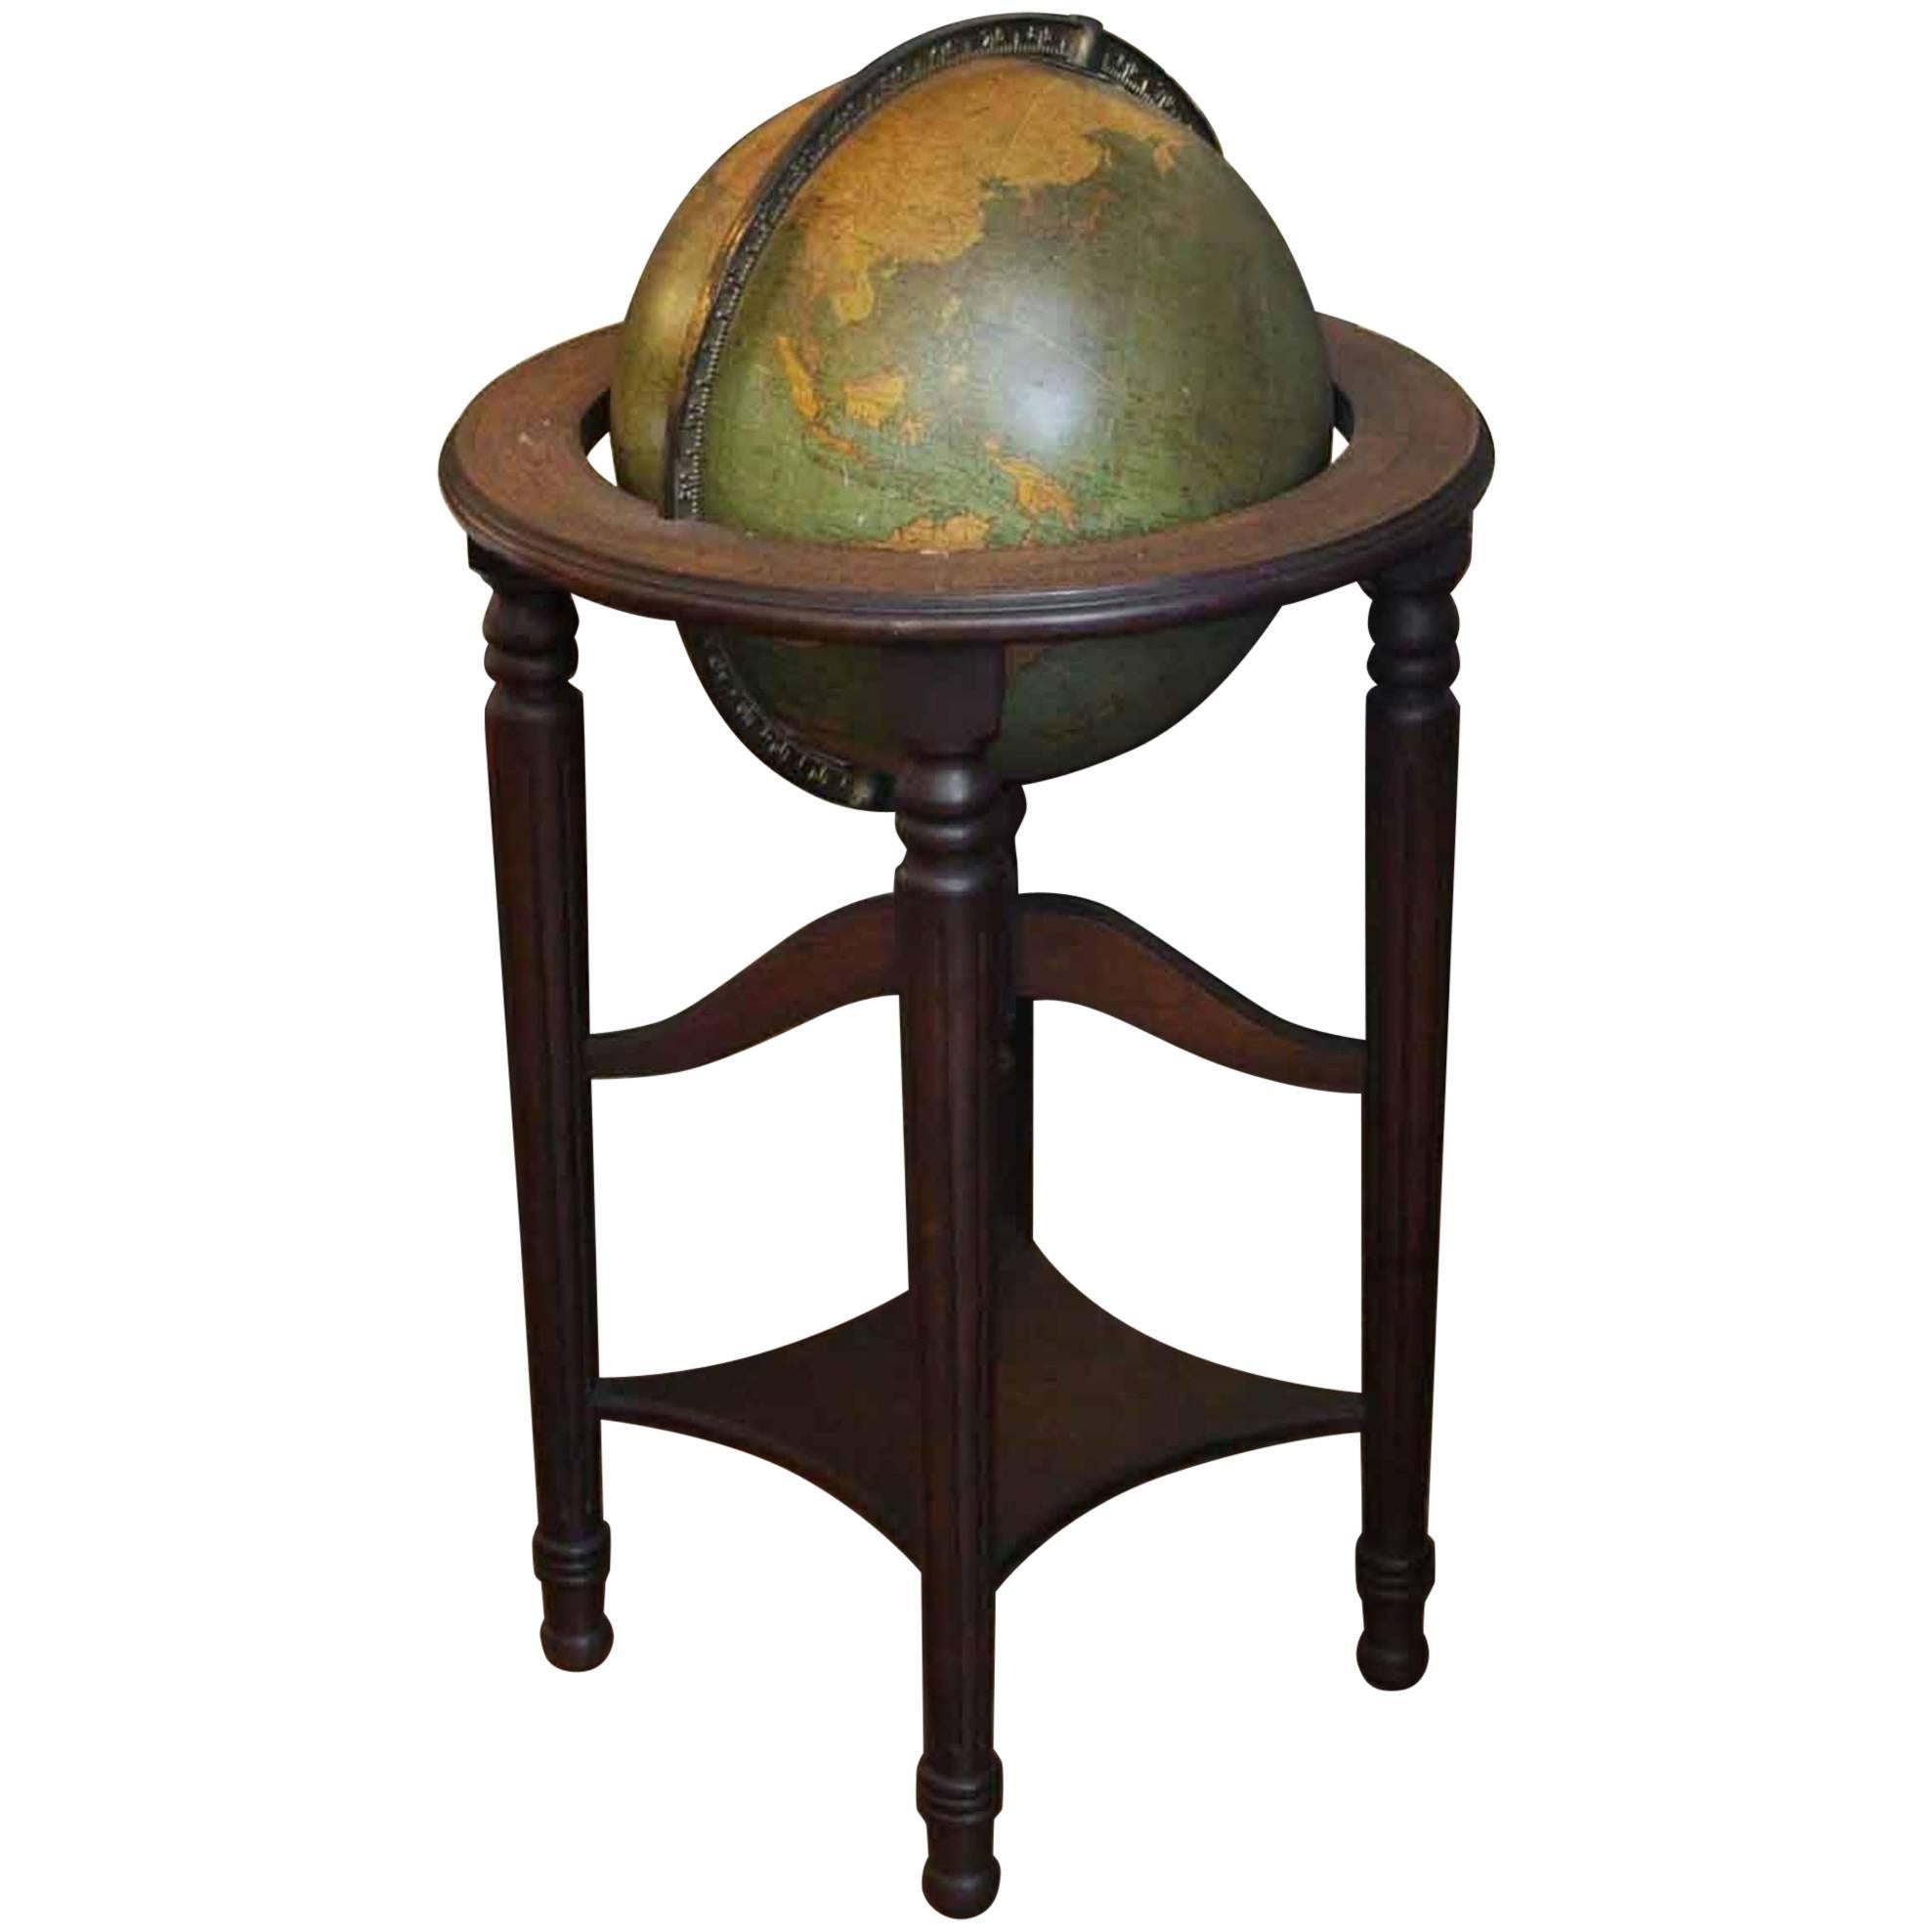 1930s George F. Cram Lighted Standing Glass Library Globe with Mahogany Base